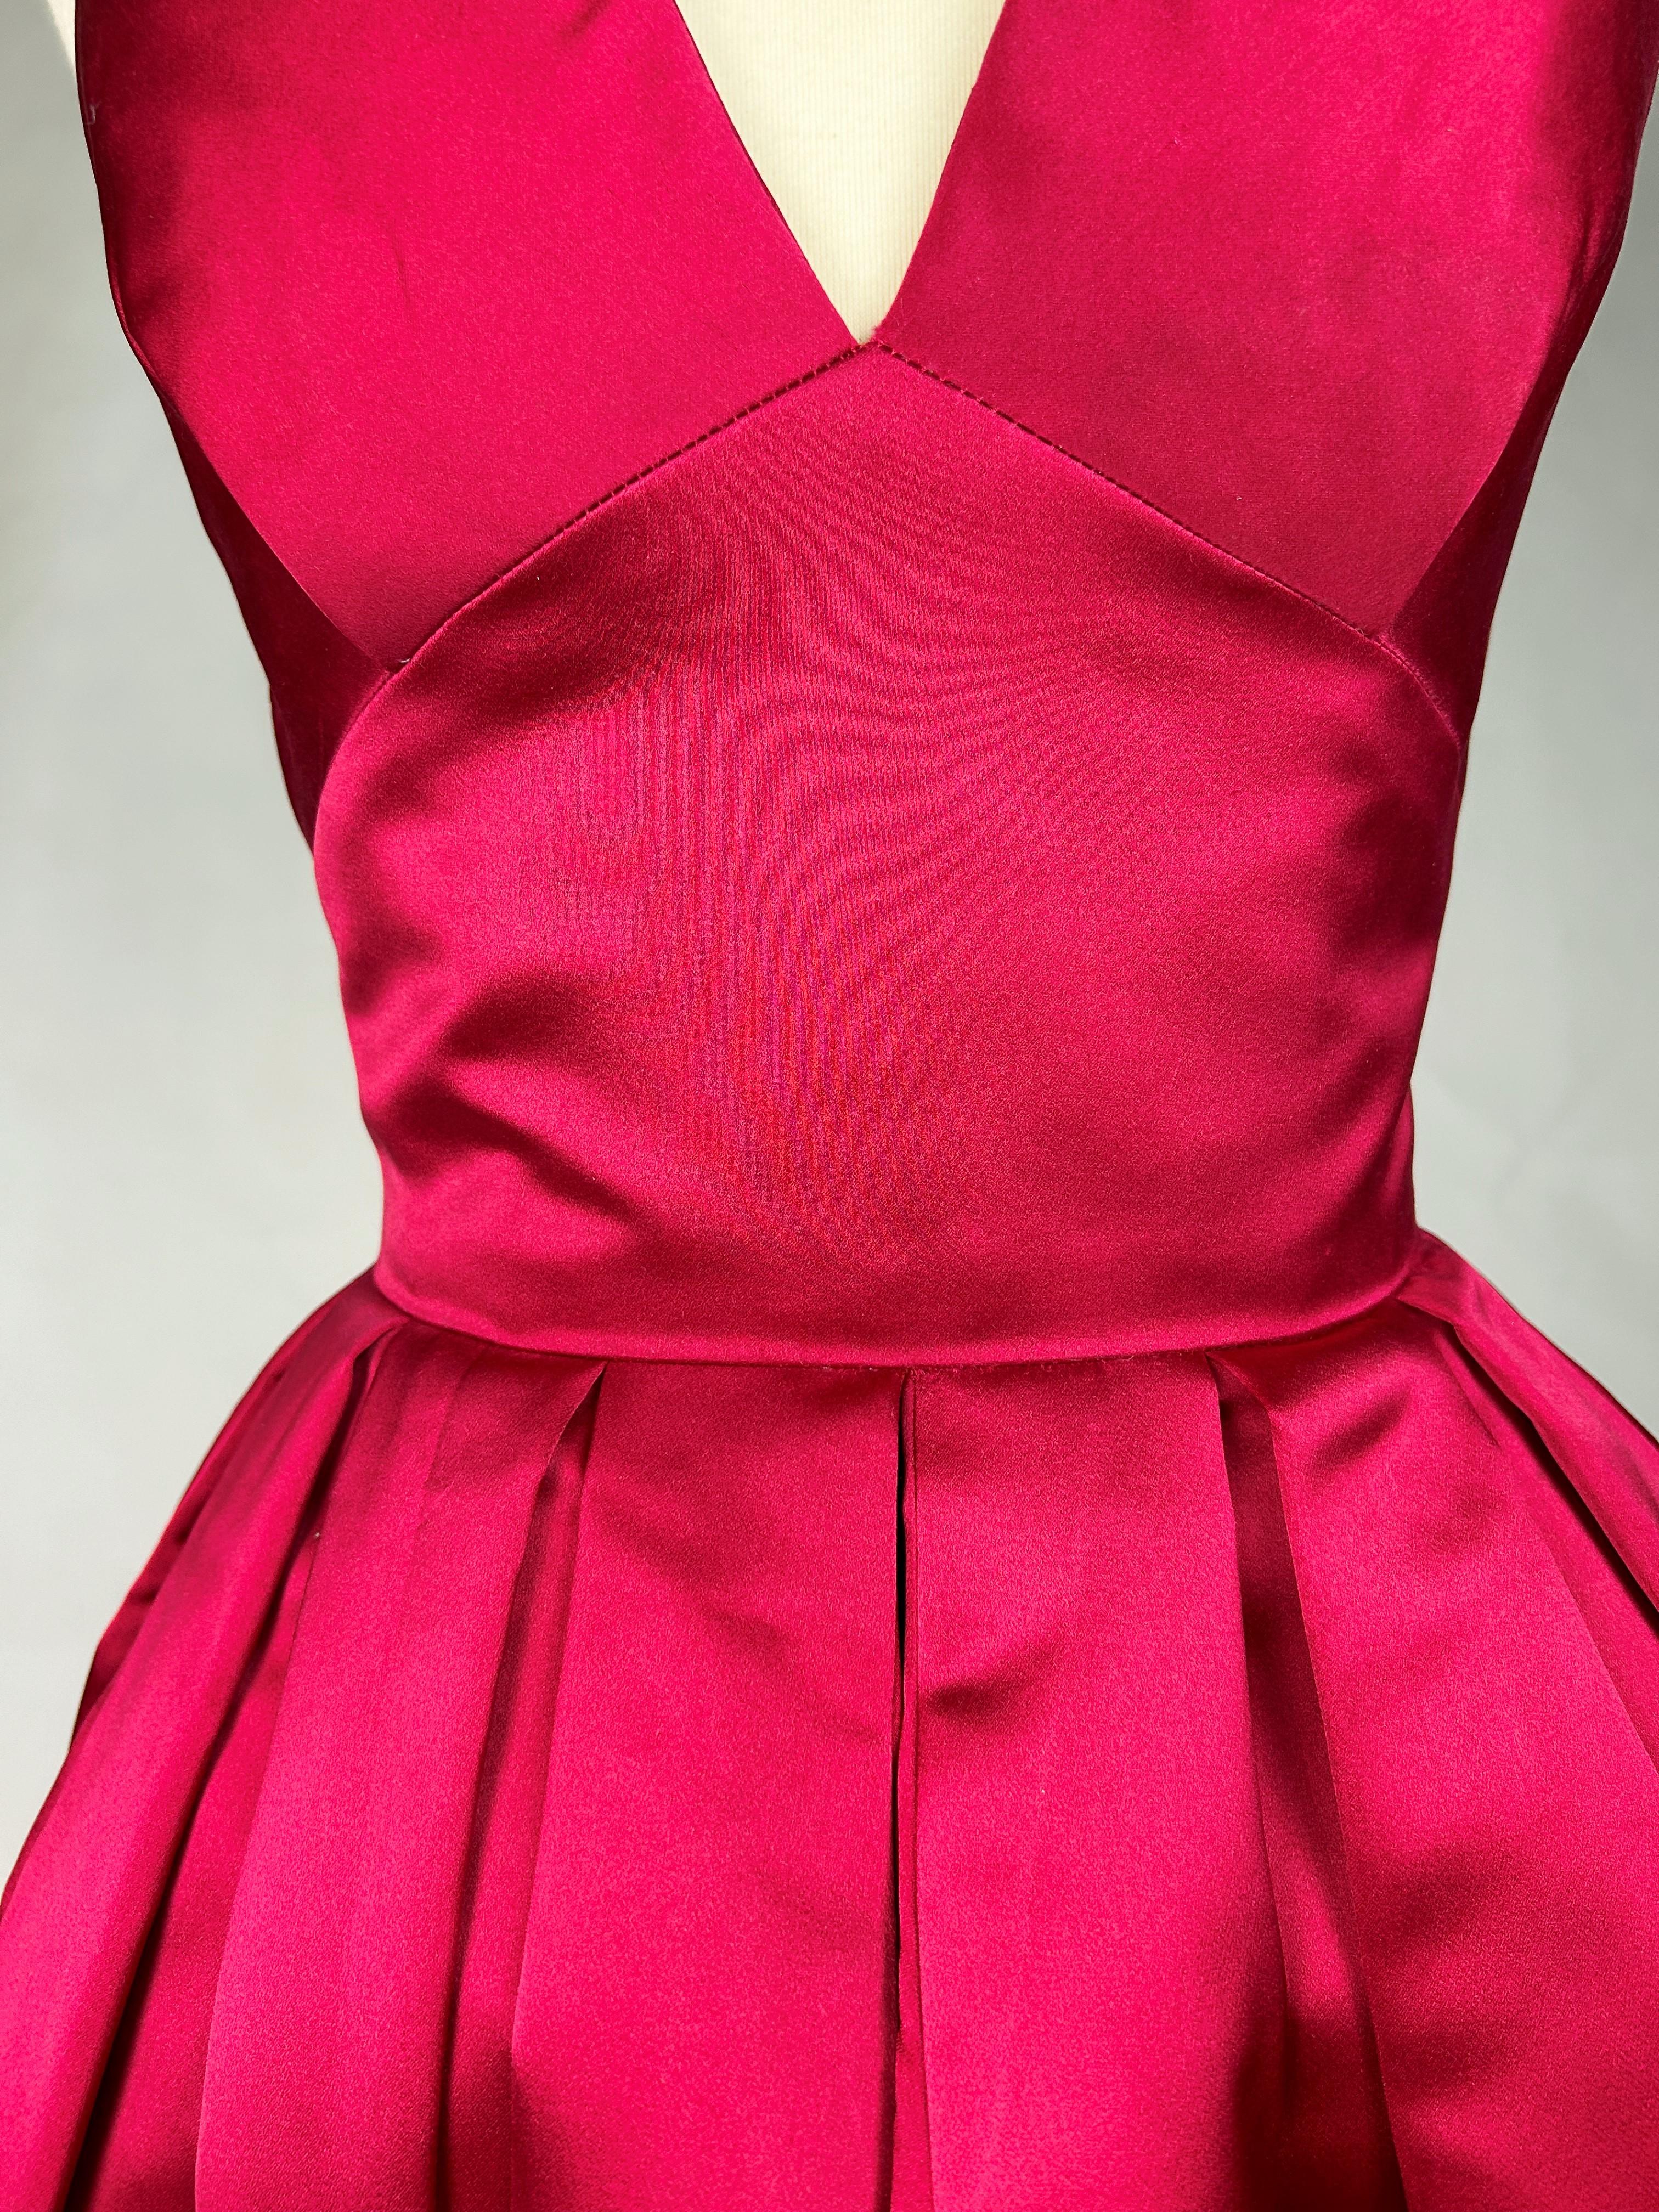 Cocktail dress in raspberry satin in the style of Christian Dior - Paris C. 1955 2